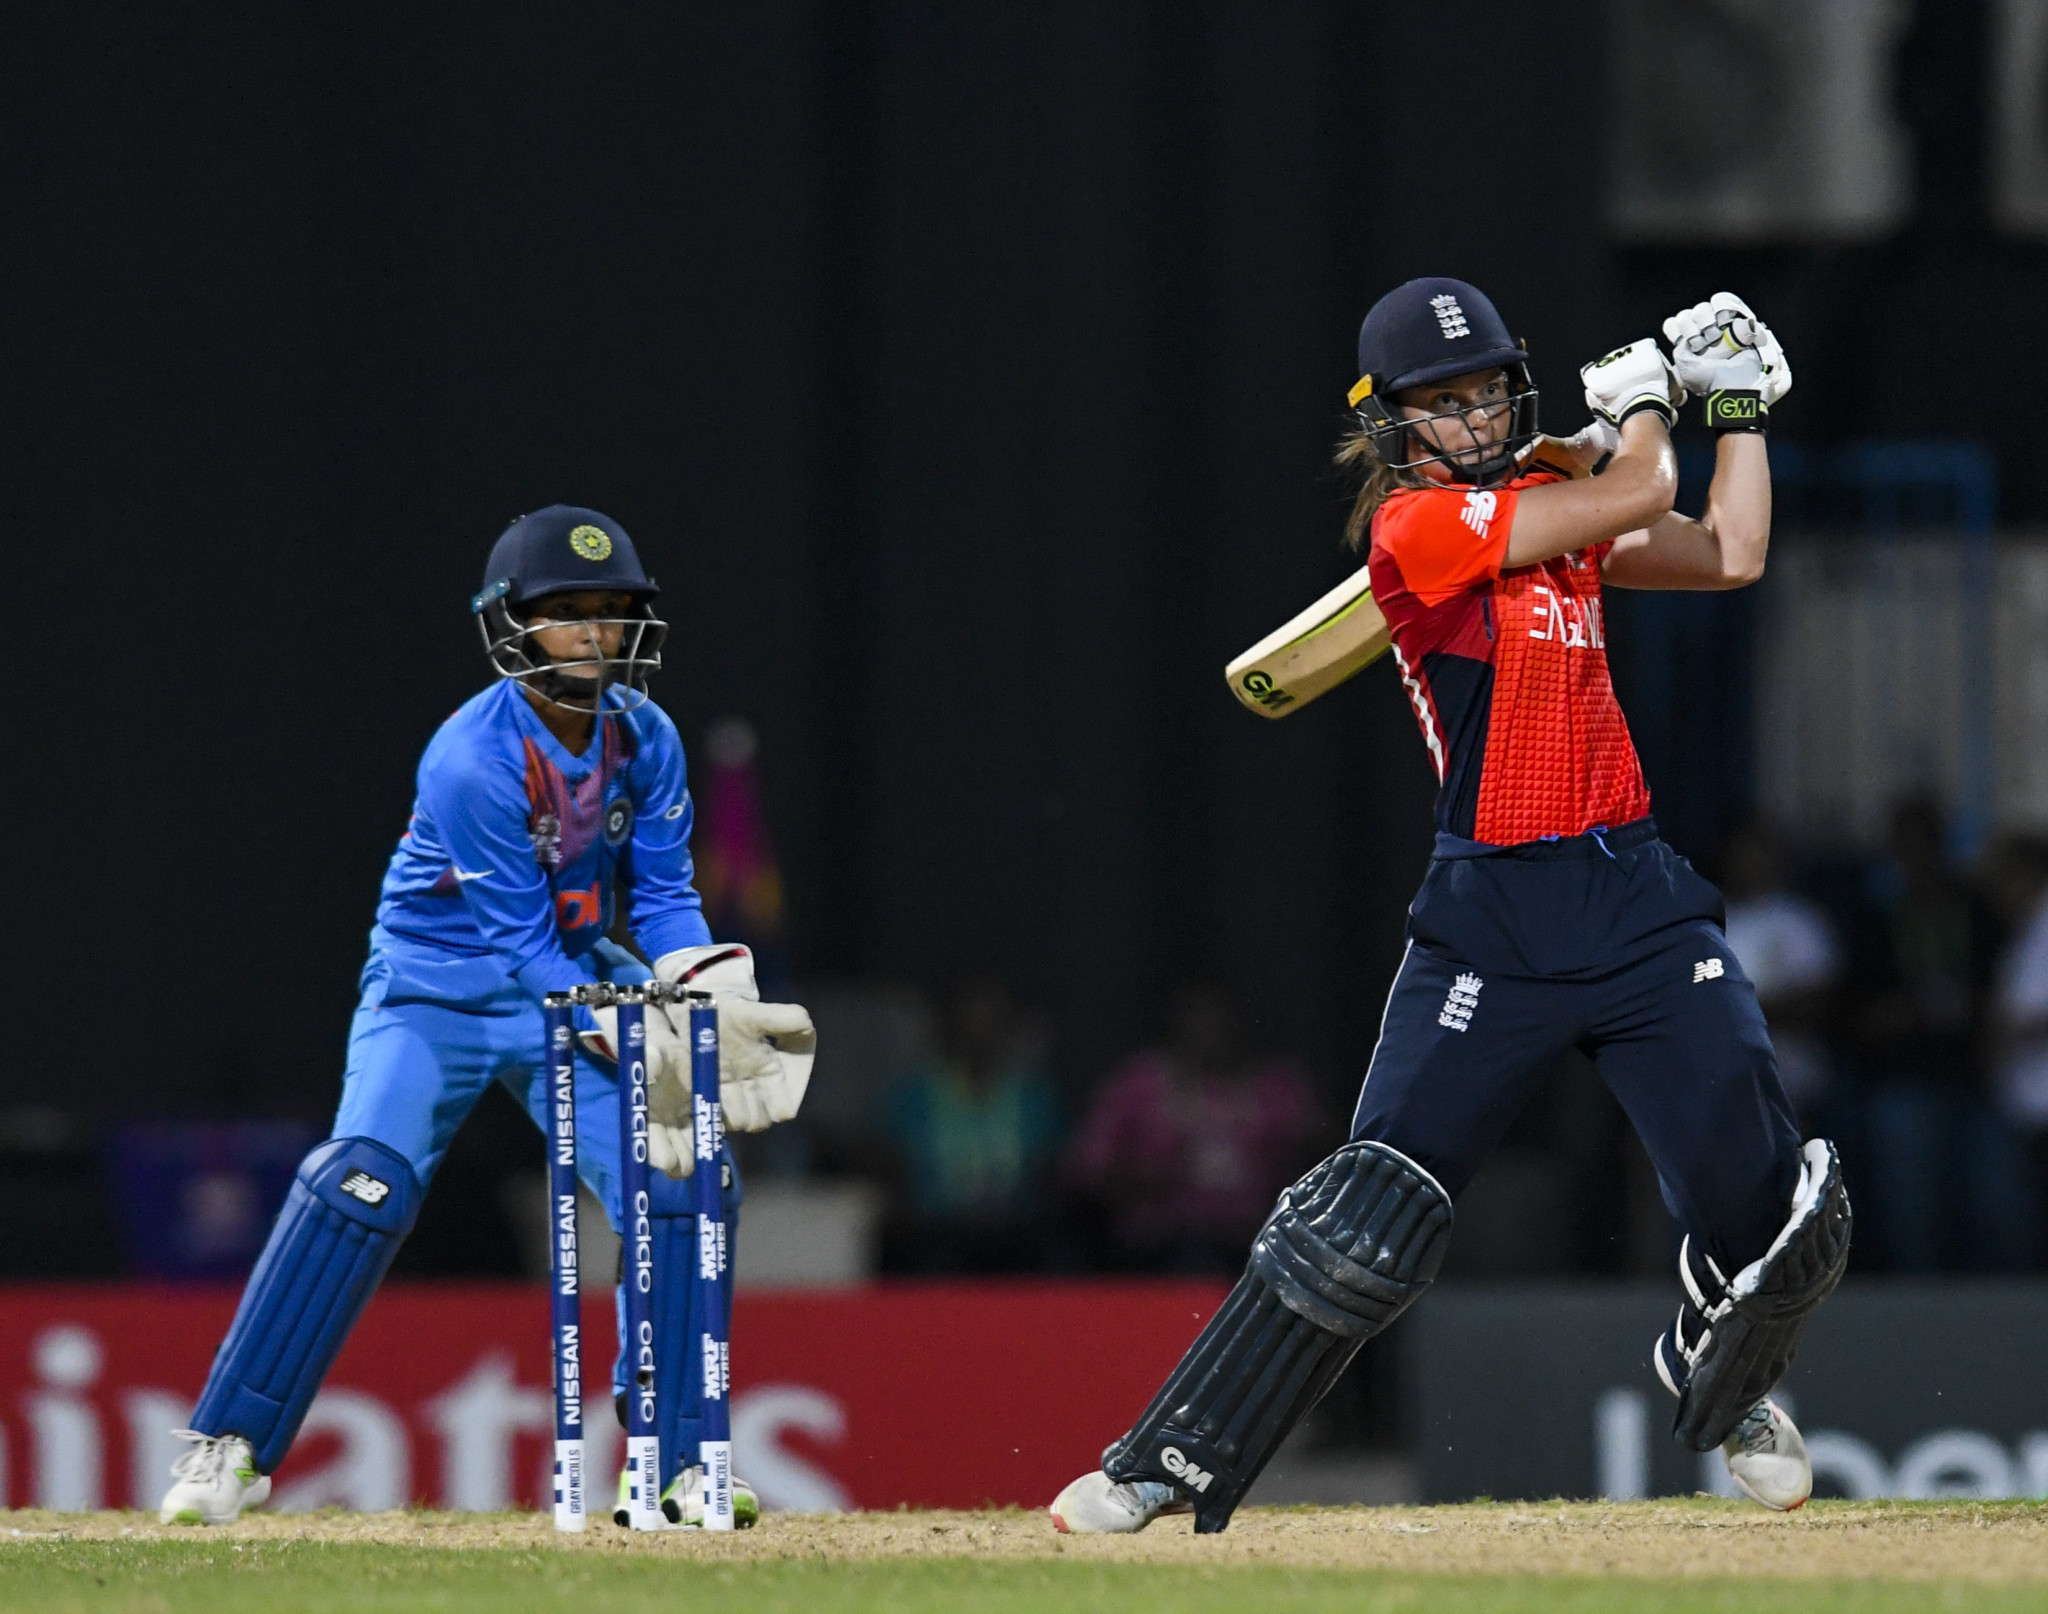 England eased past India to make the final ©Getty Images